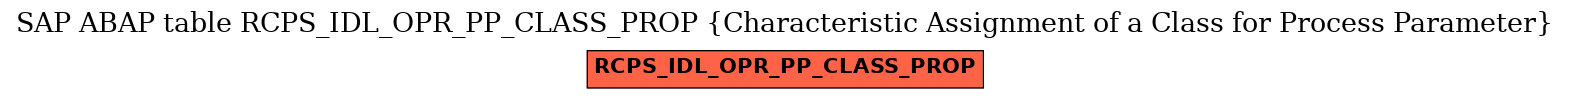 E-R Diagram for table RCPS_IDL_OPR_PP_CLASS_PROP (Characteristic Assignment of a Class for Process Parameter)